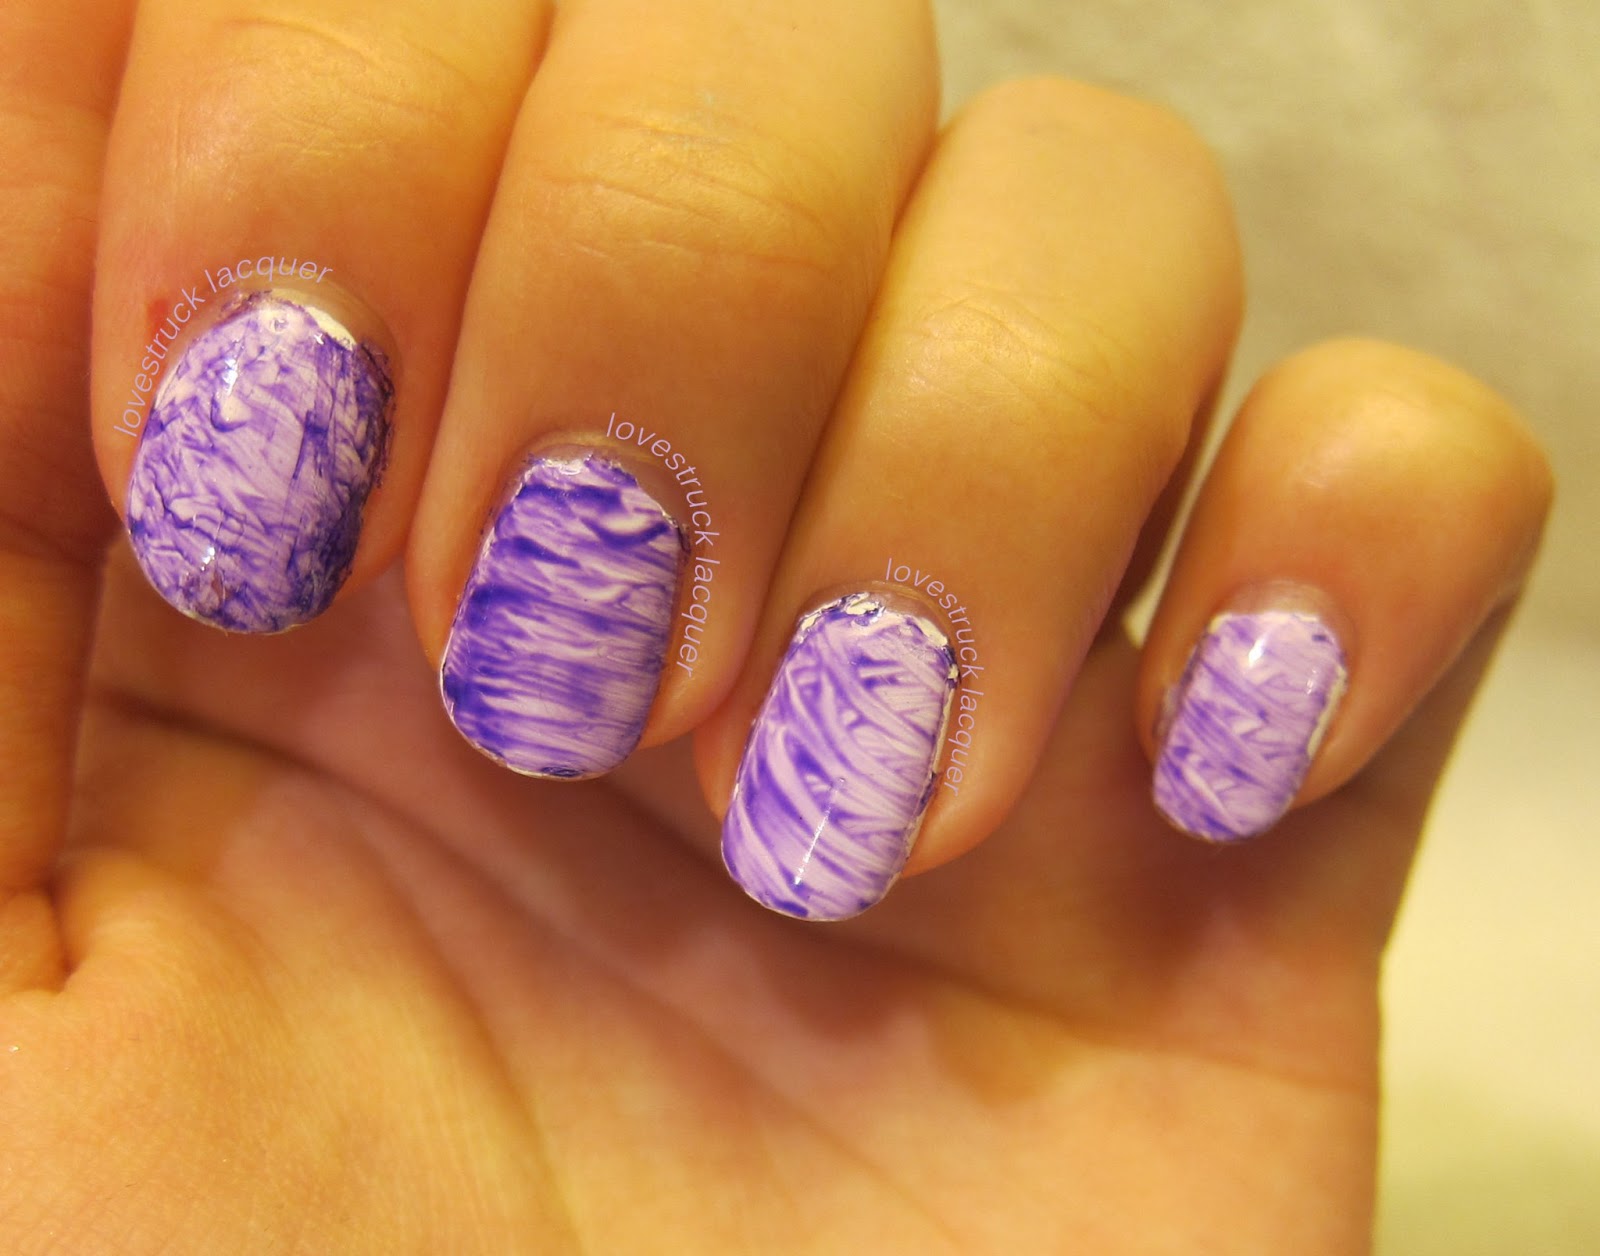 7. Fan Brush Nail Art Designs for Short Nails - wide 2